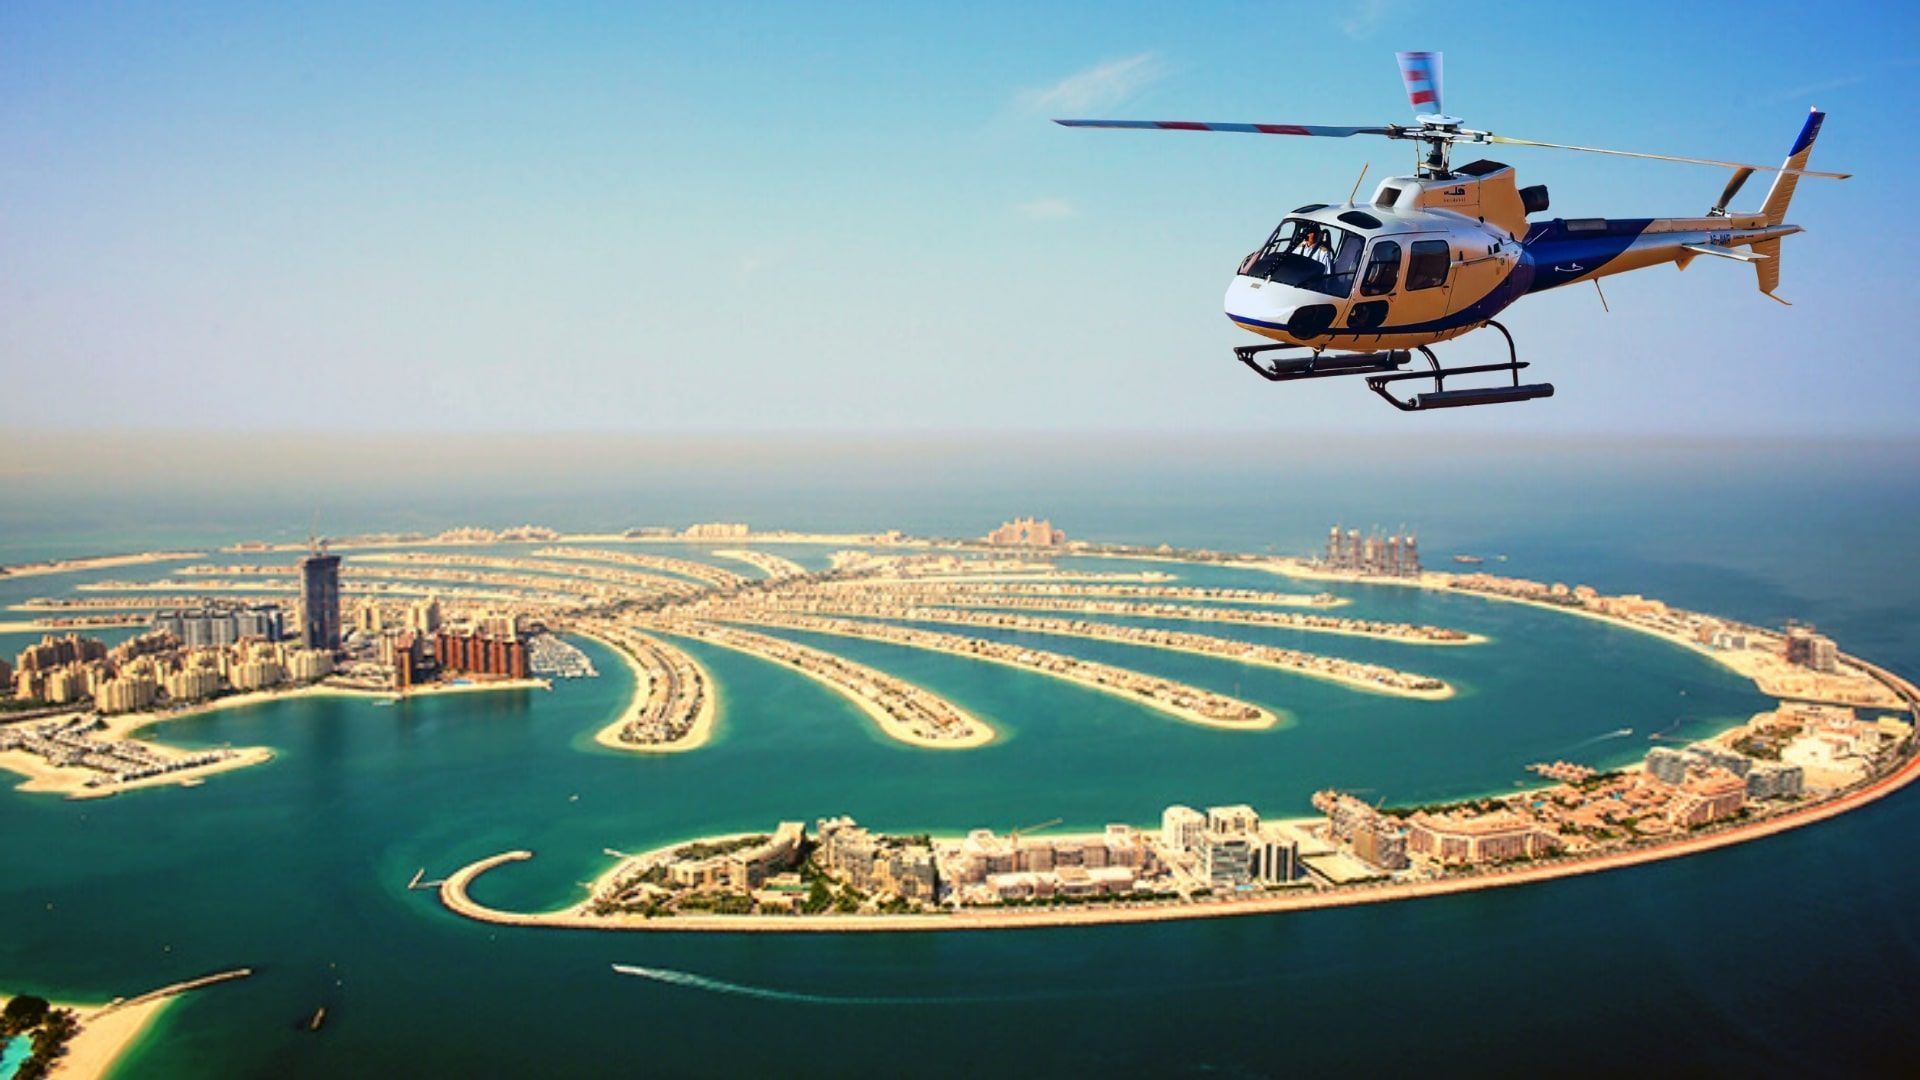 Soaring High: Exploring Dubai’s Iconic Landmarks with a Helicopter Tour